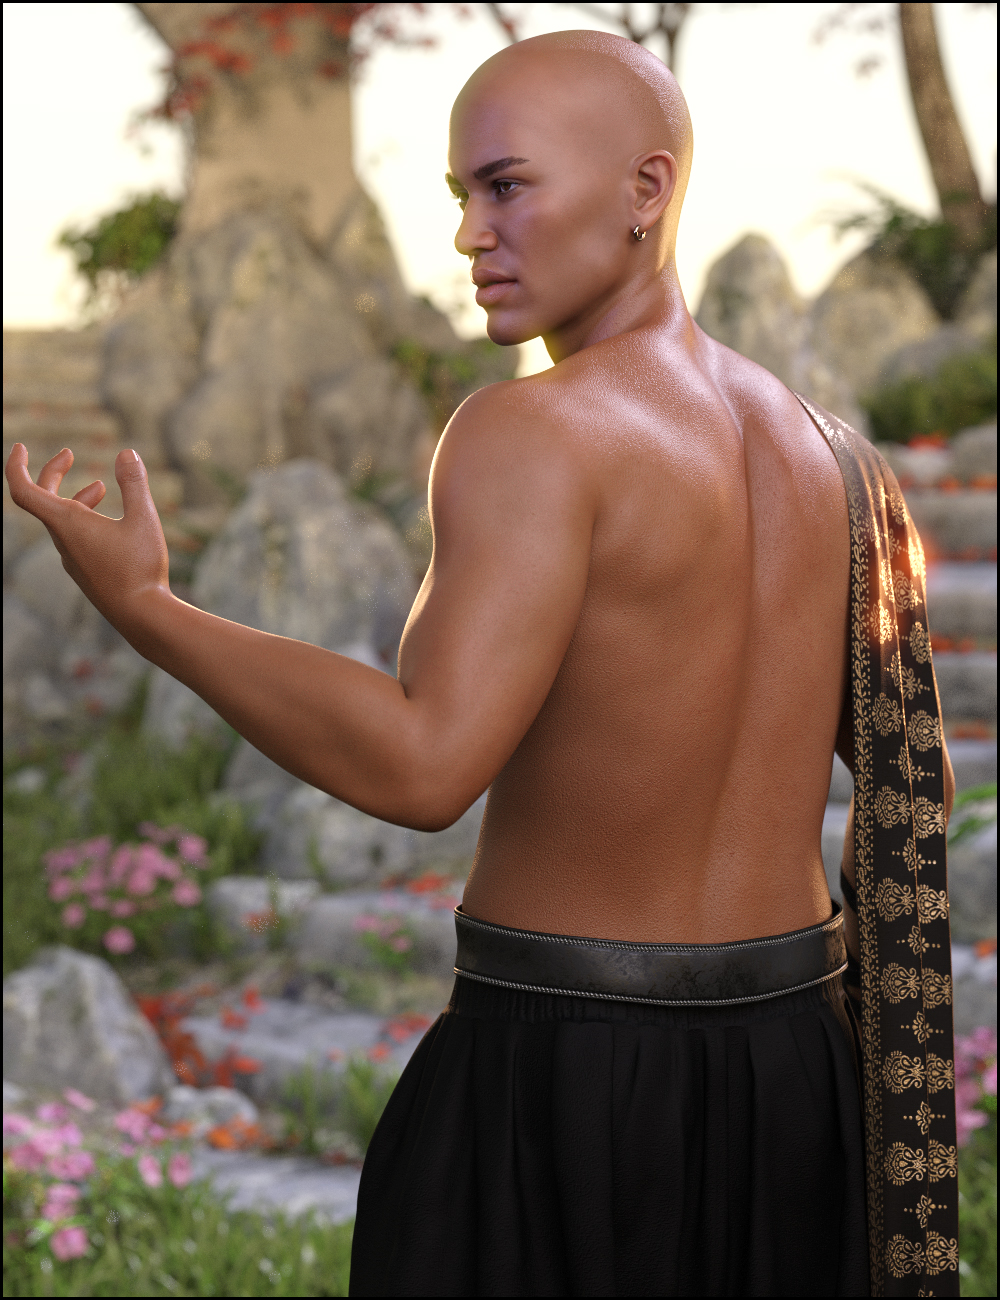 Ytar for Ashan 8 by: Jessaii, 3D Models by Daz 3D